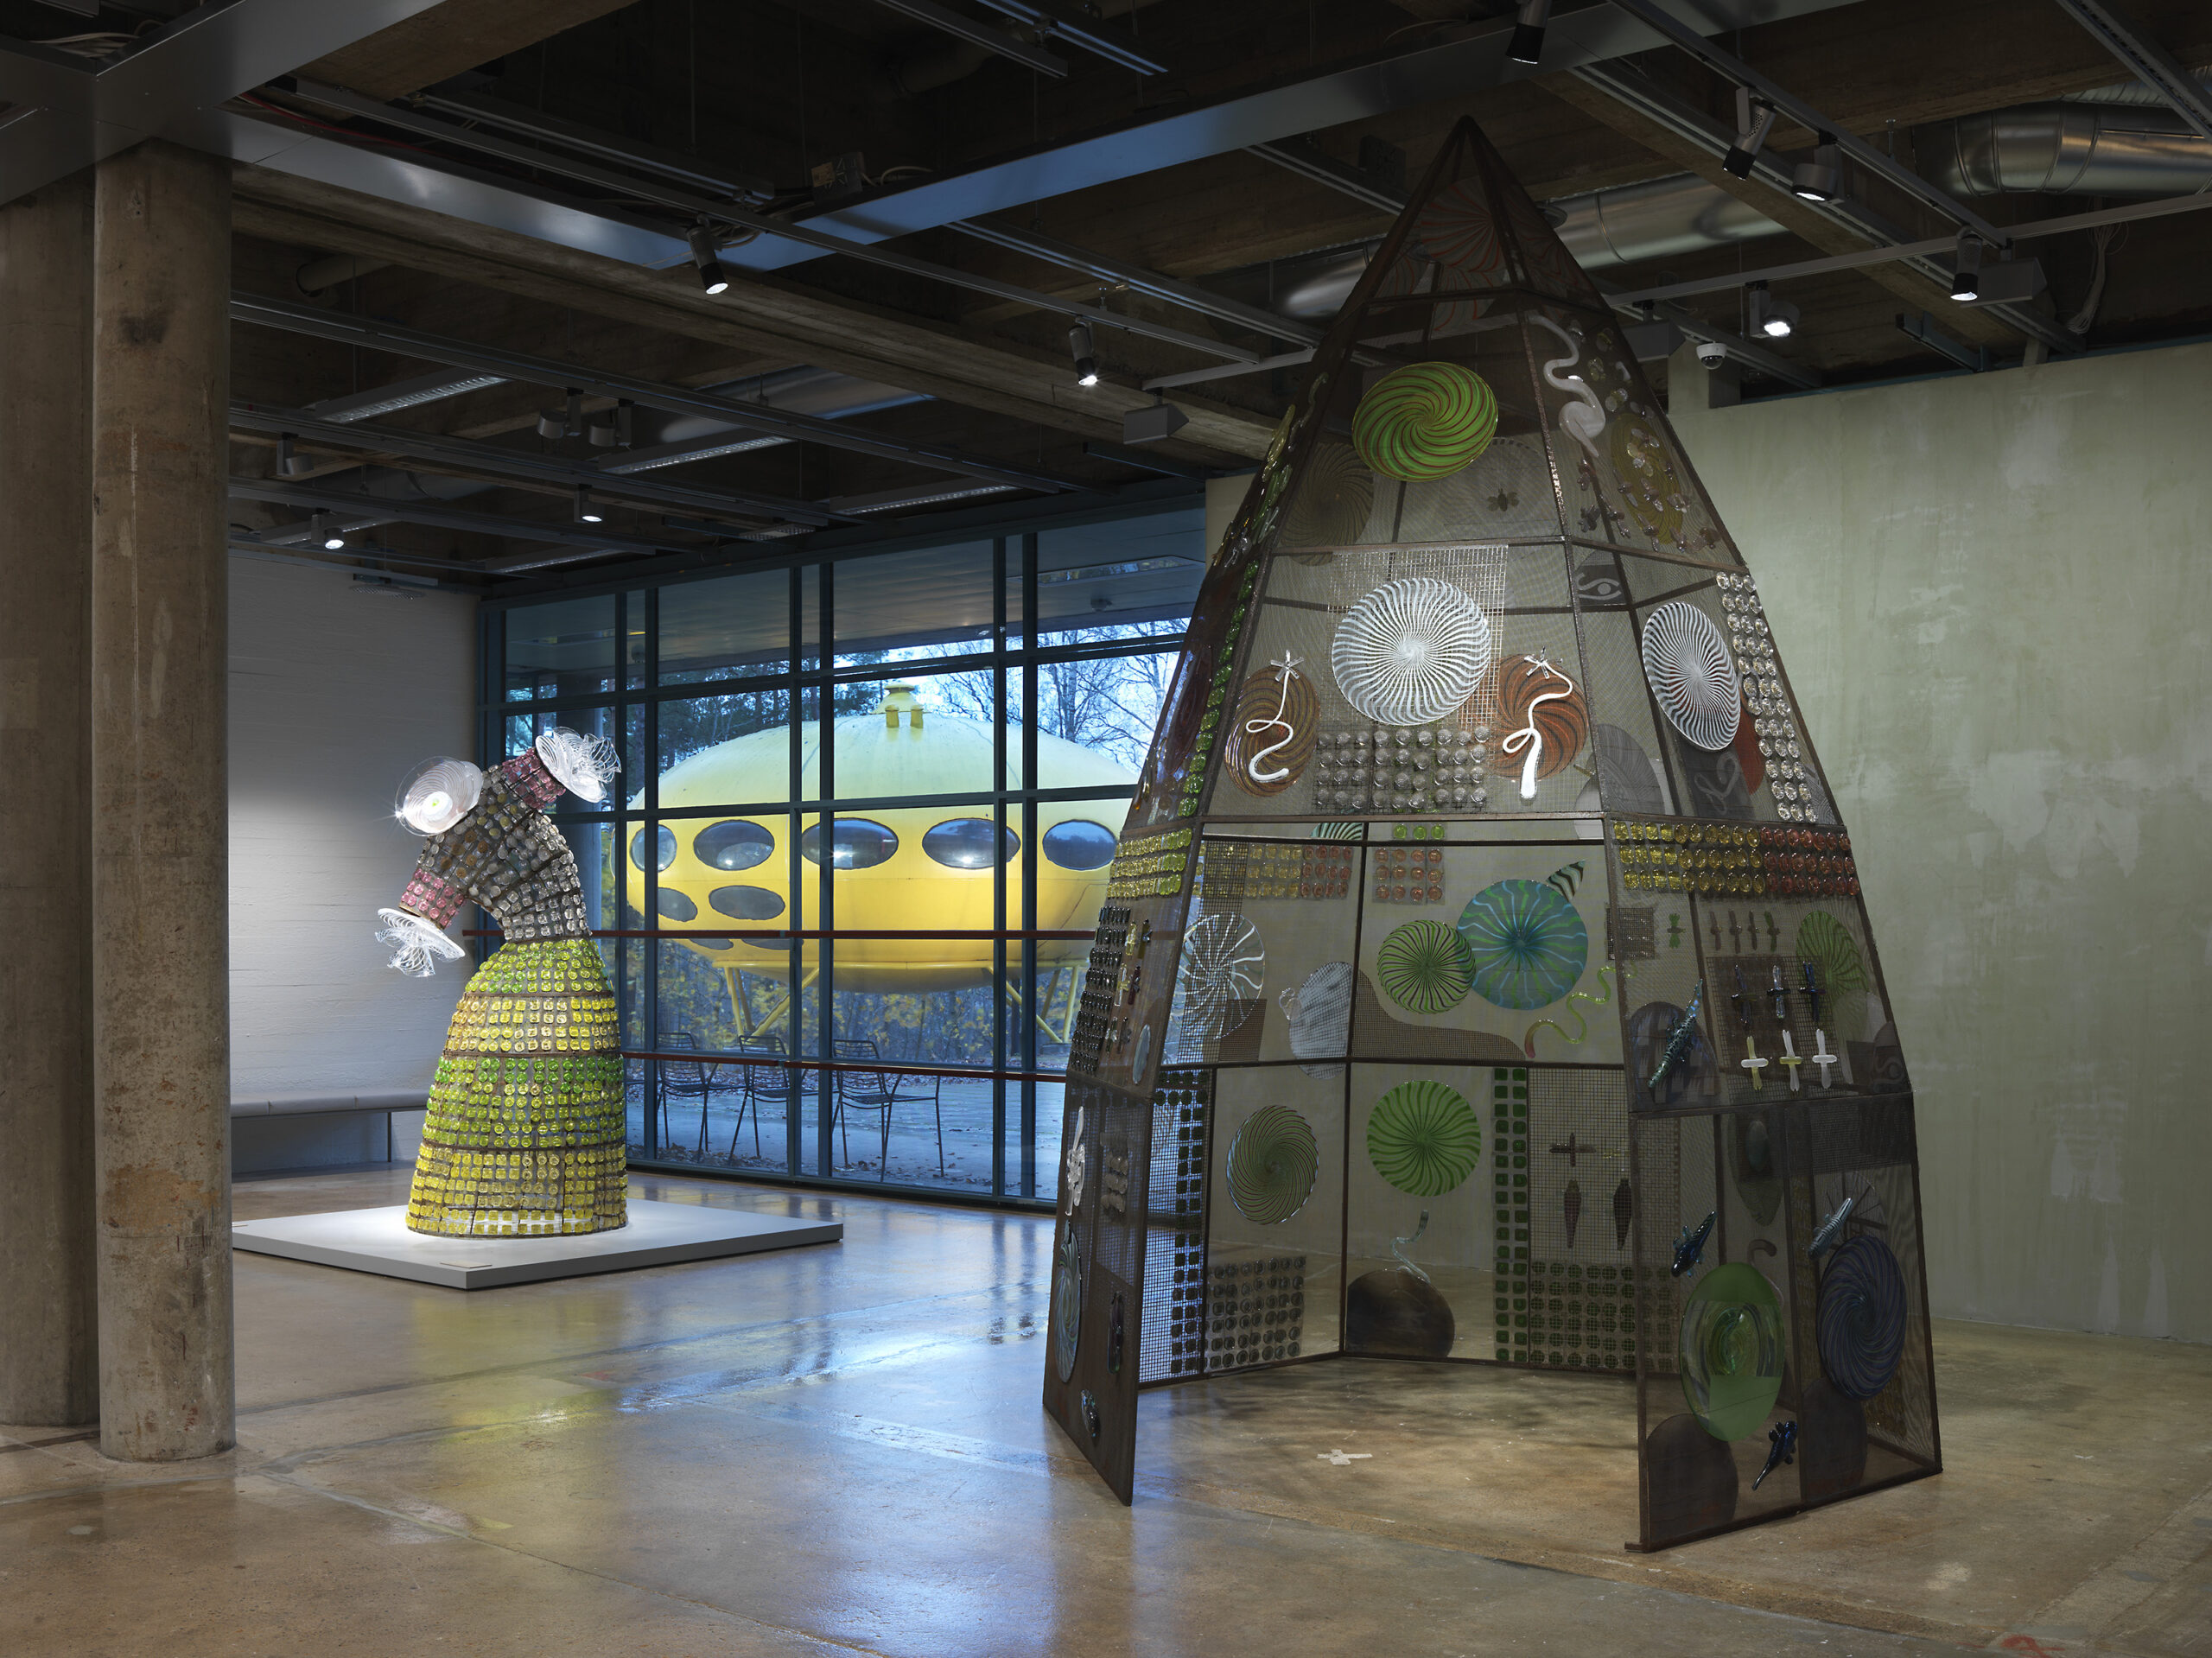 Two large works in a spacious exhibition space. The works, resembling a dress and a gazebo, consist of glass elements attached to a metal frame.